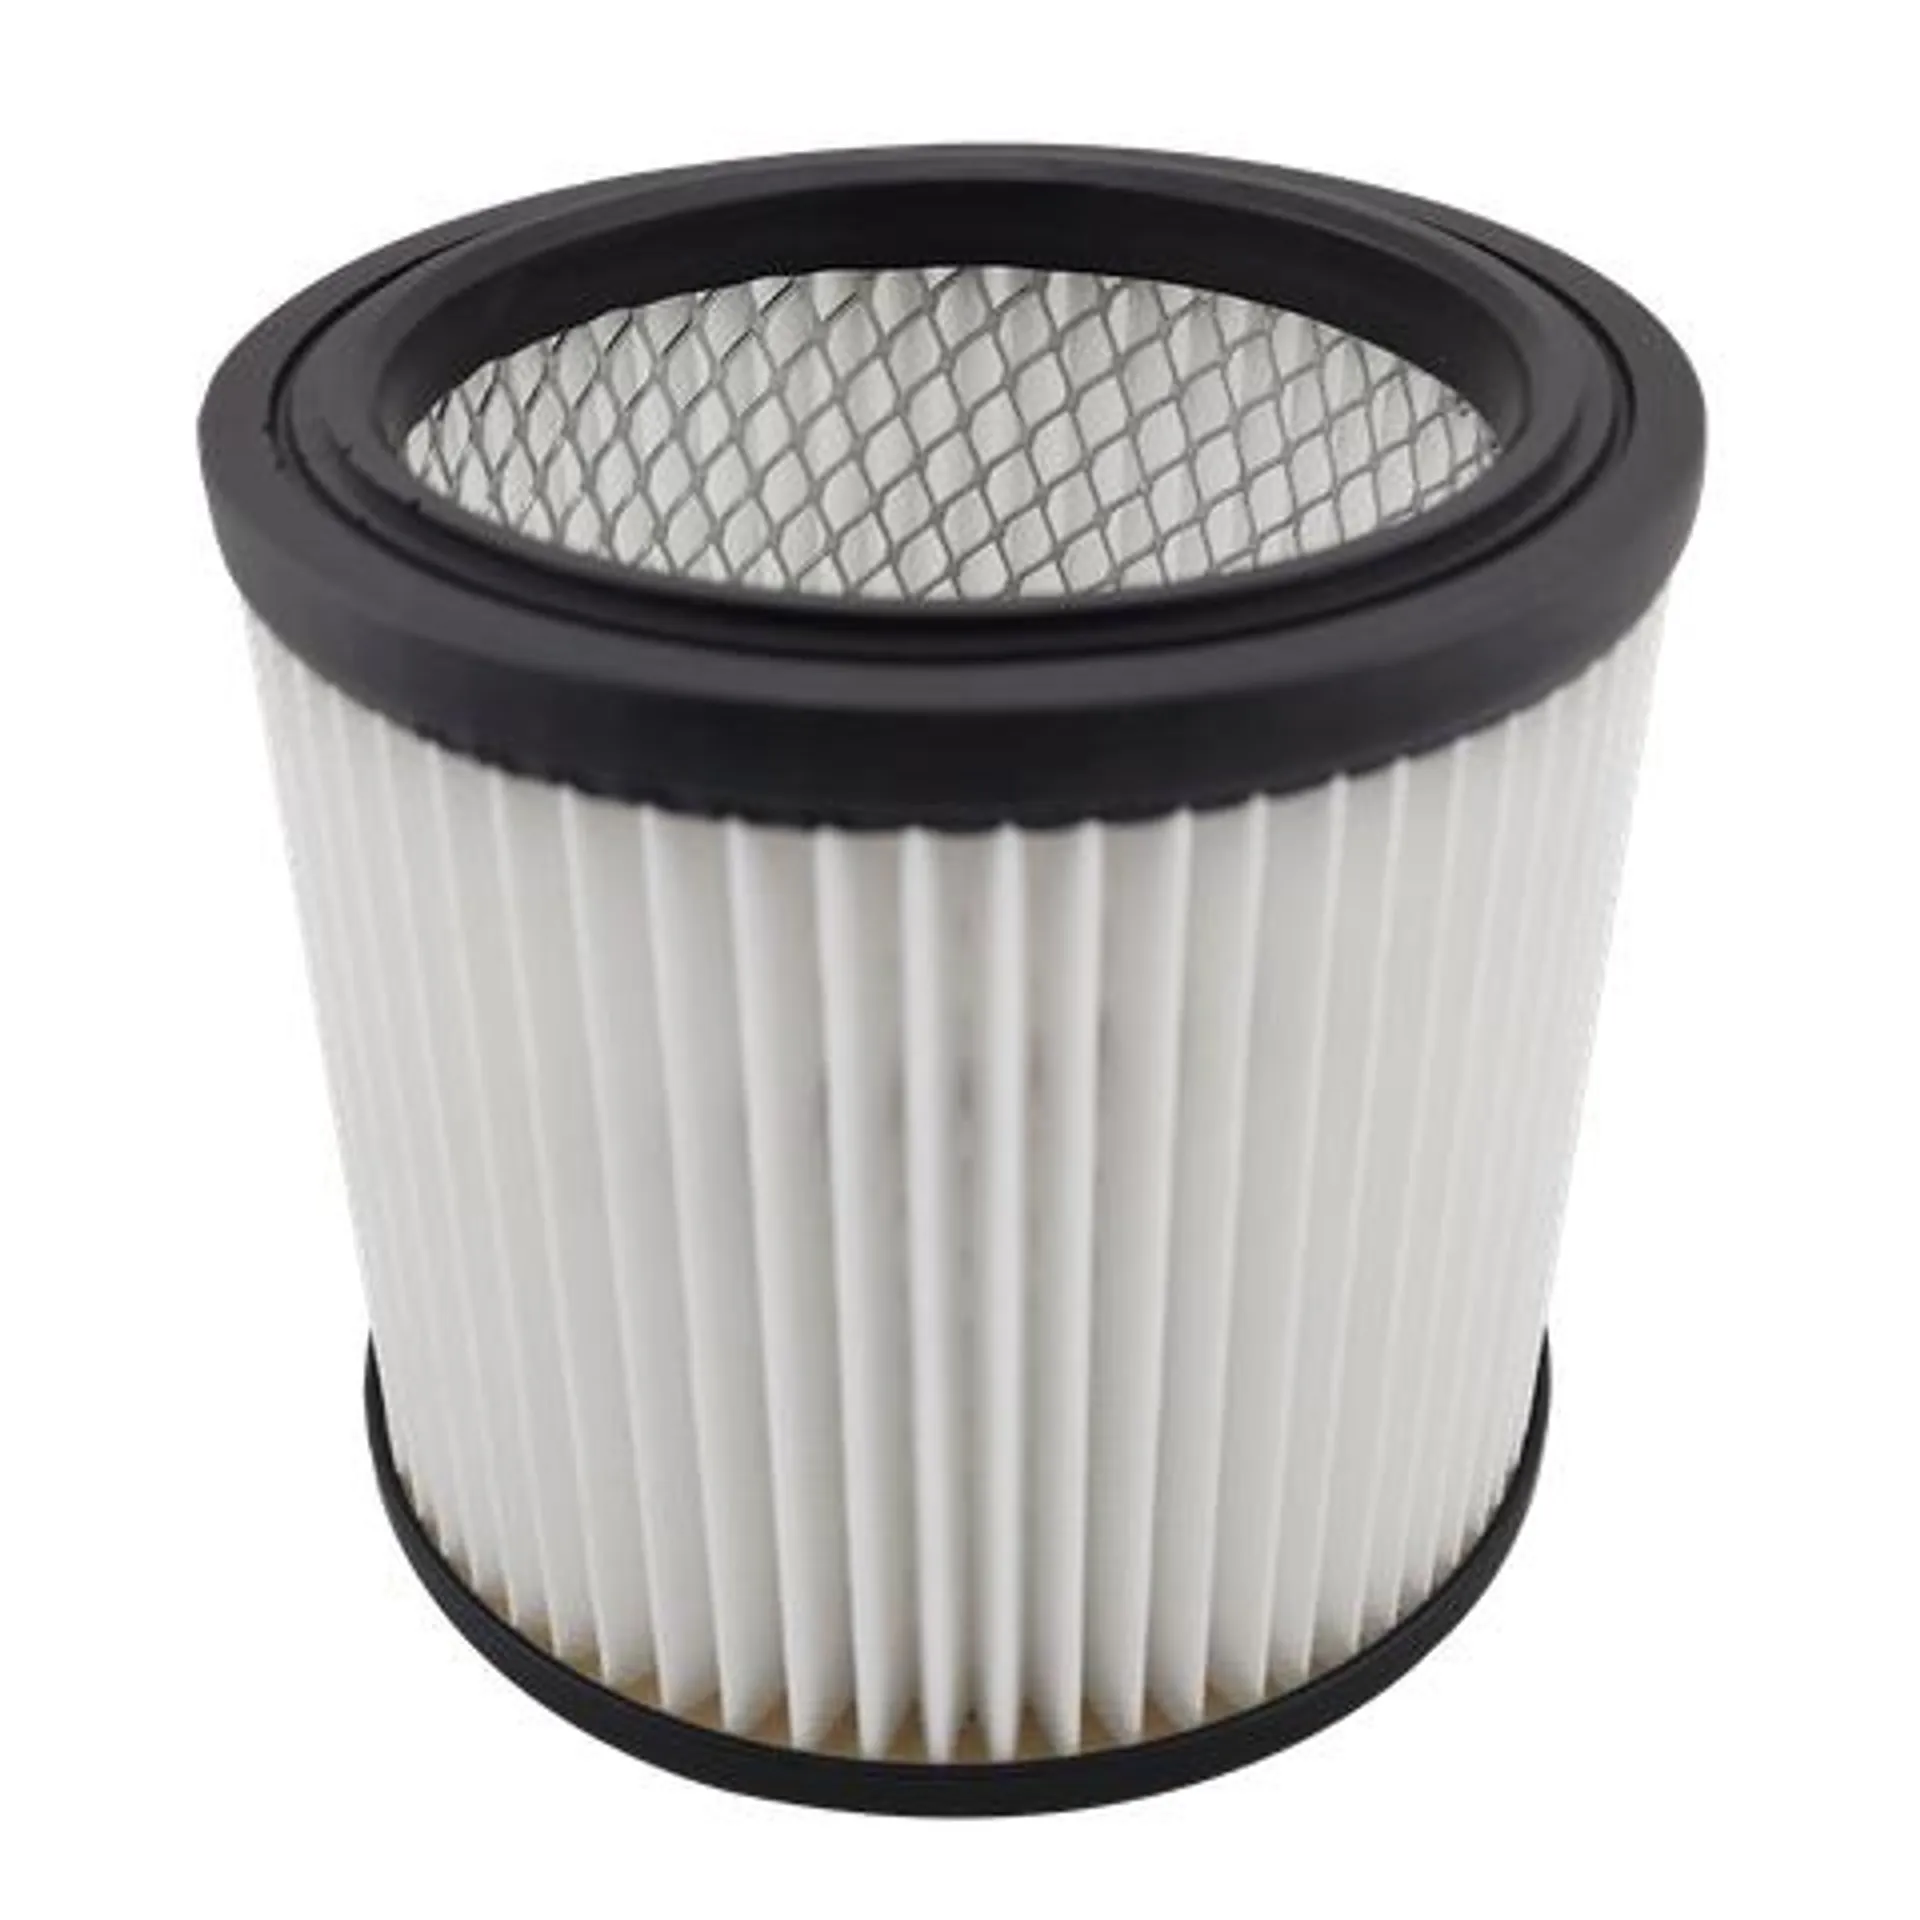 ToolShed HEPA Filter for TSVC11